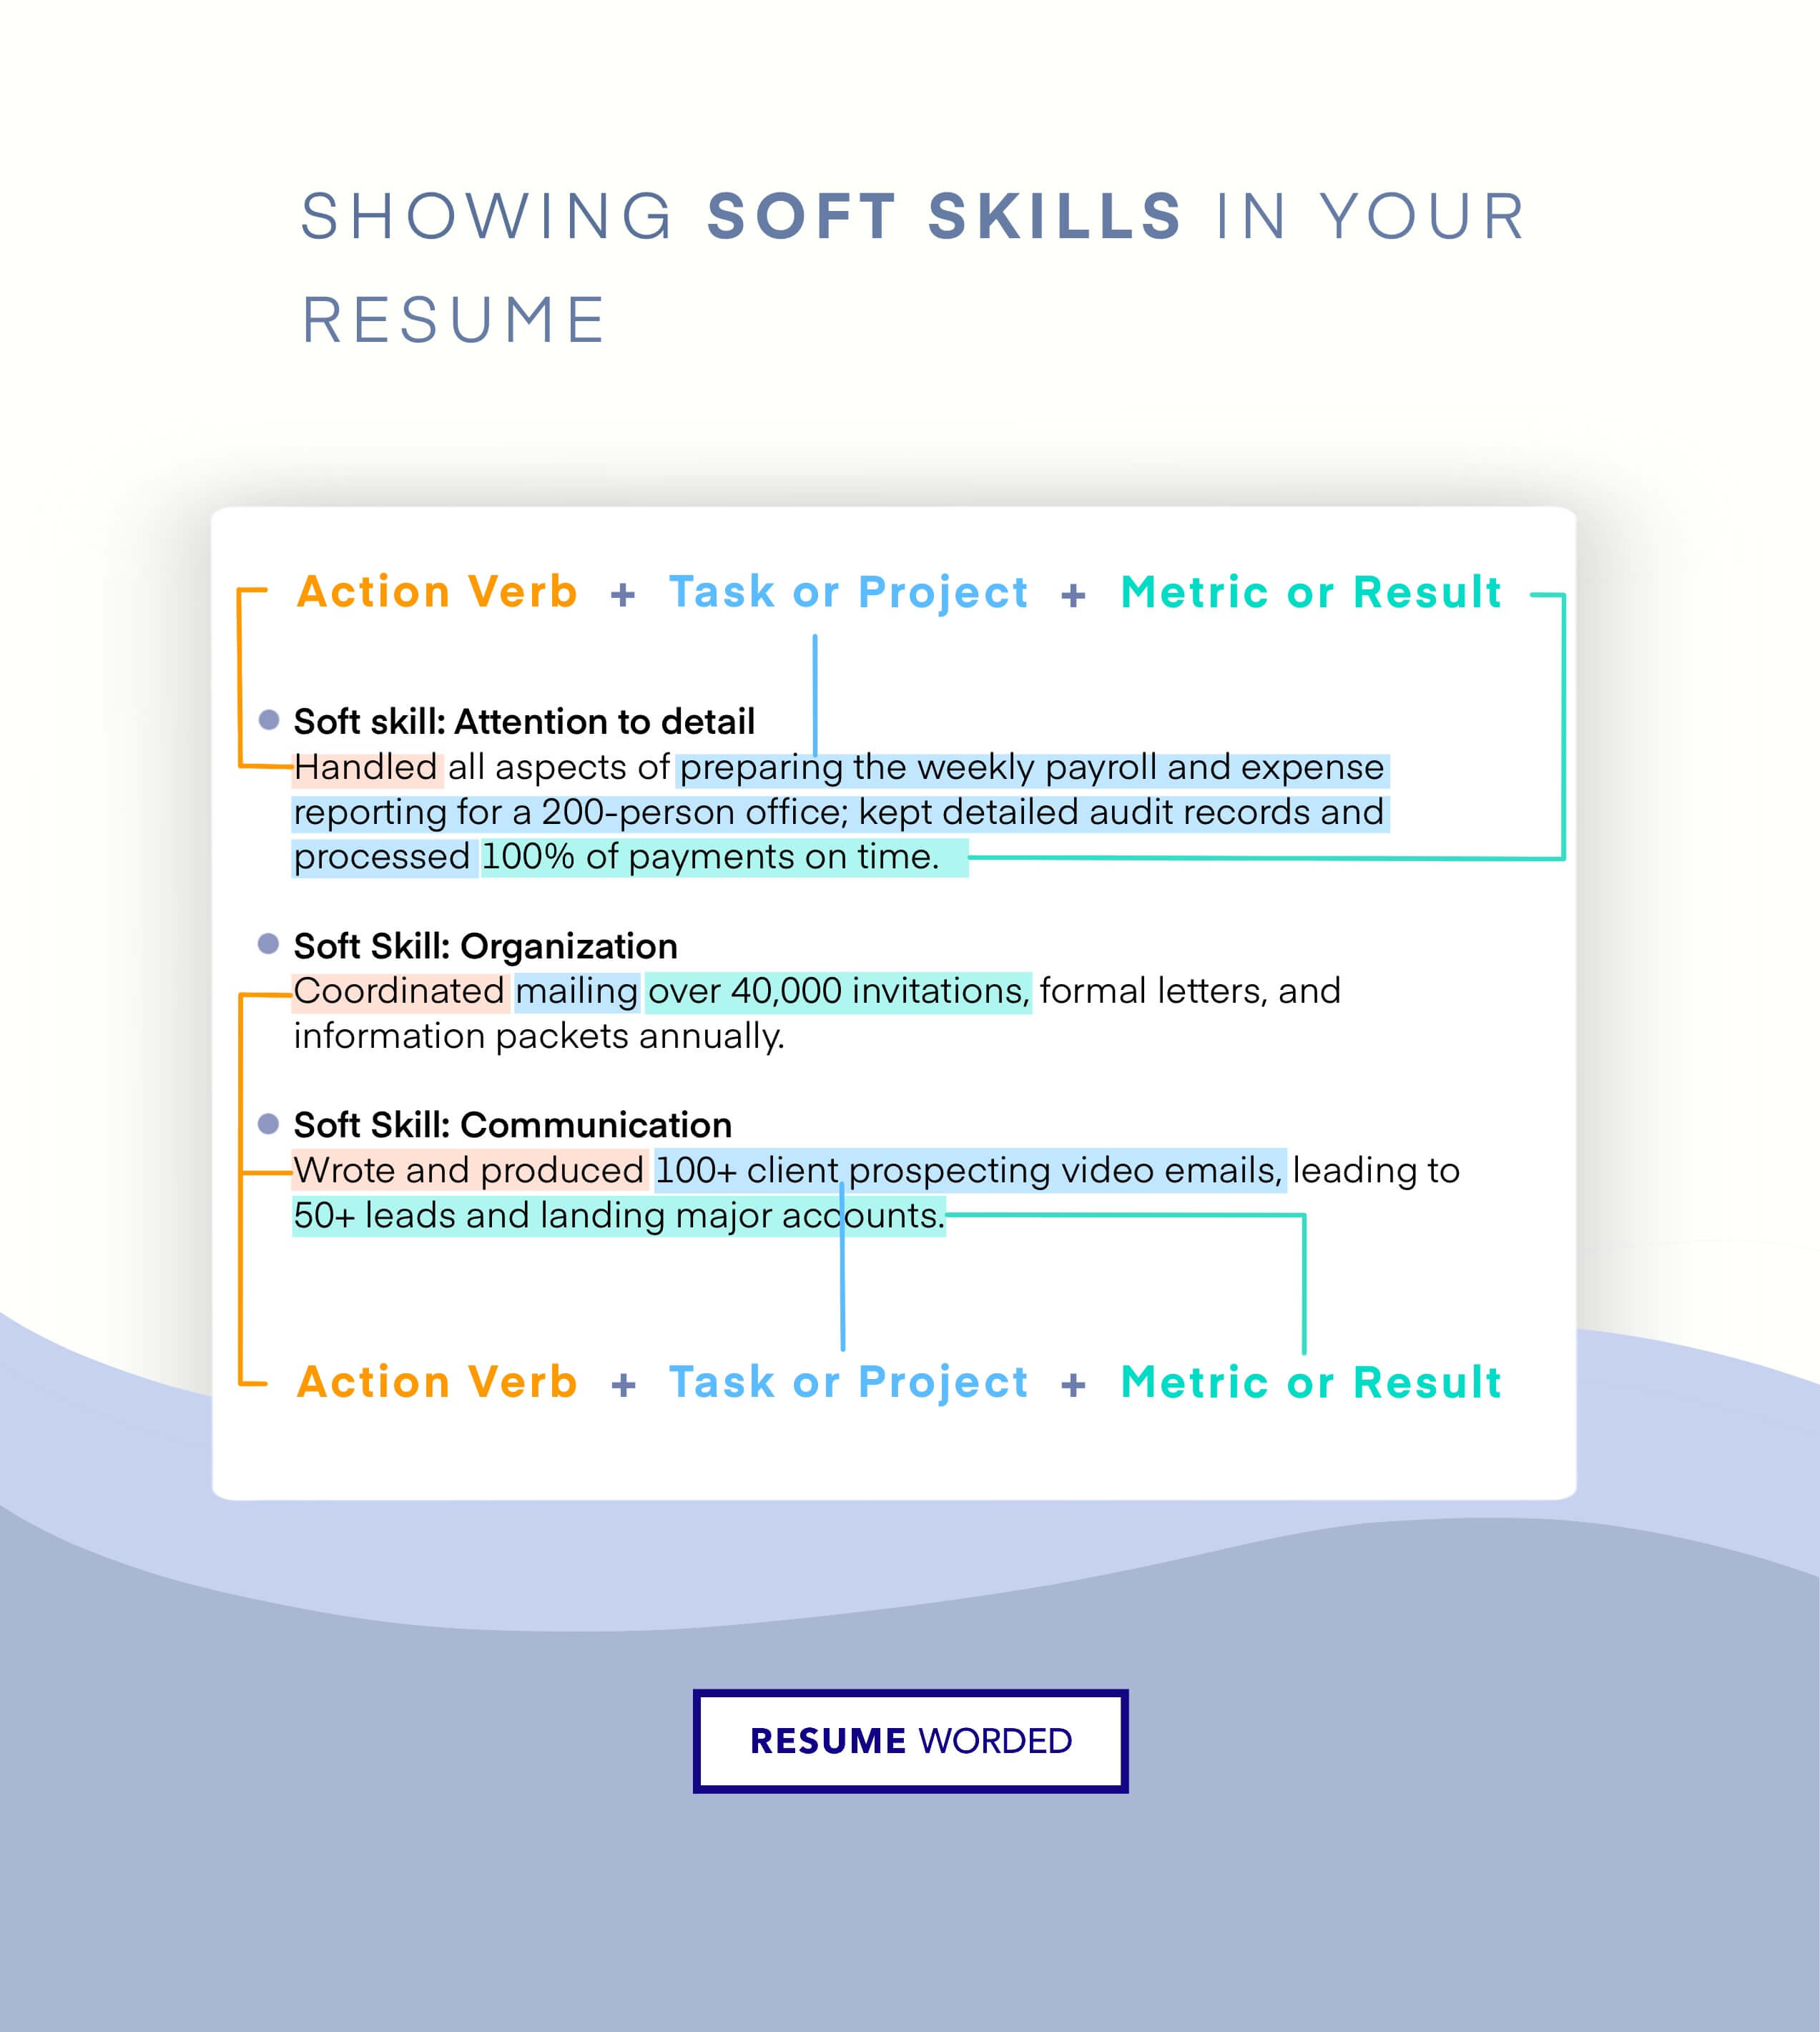 Demonstrate soft skills through bullet points - Chief Information Officer (CIO) - 1 Resume